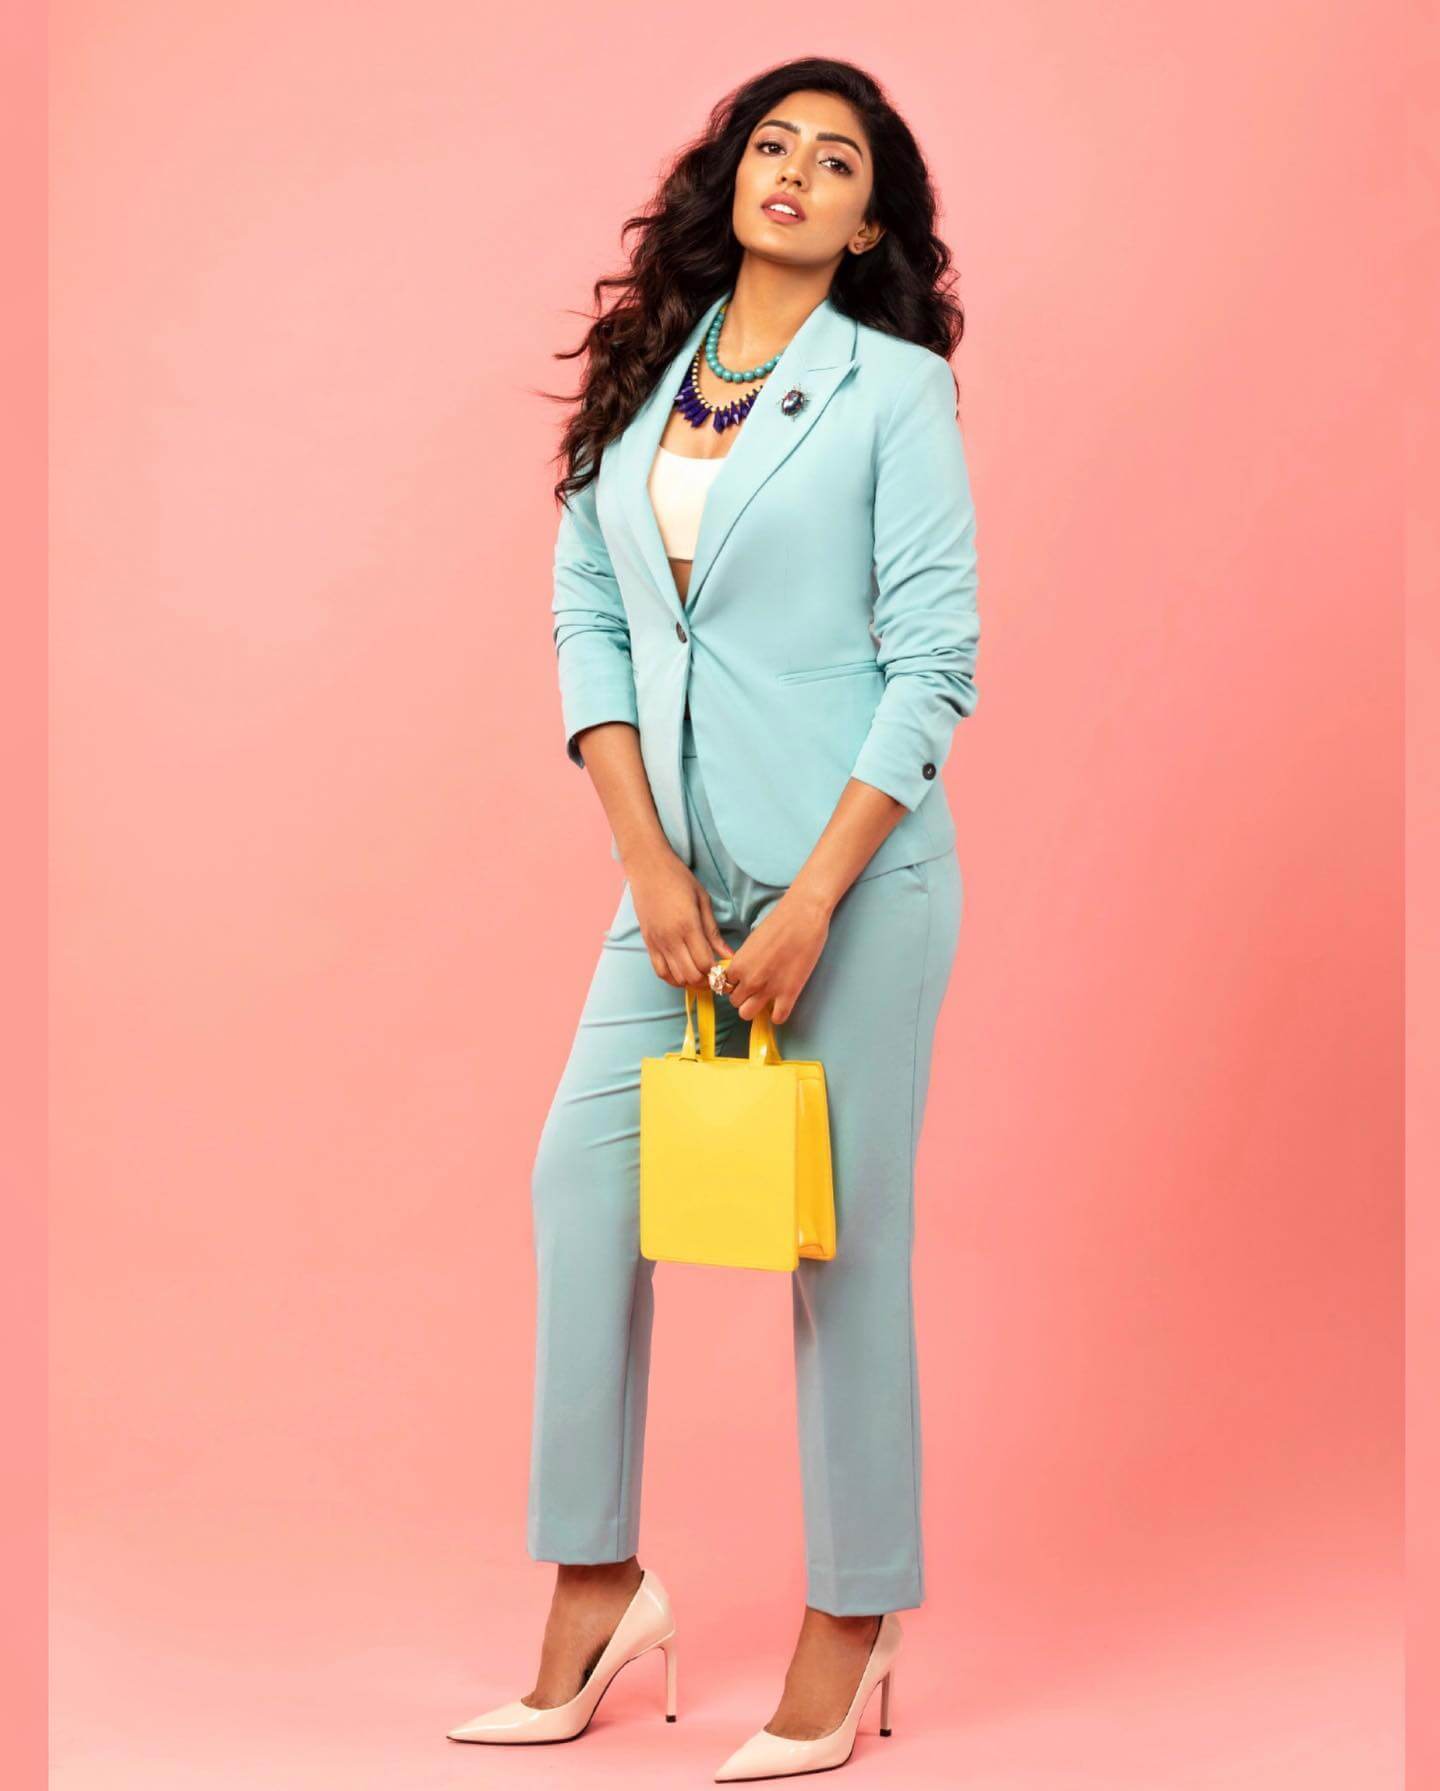 Eesha Rebba Shows How To Look chic In Blue Blazer Pants